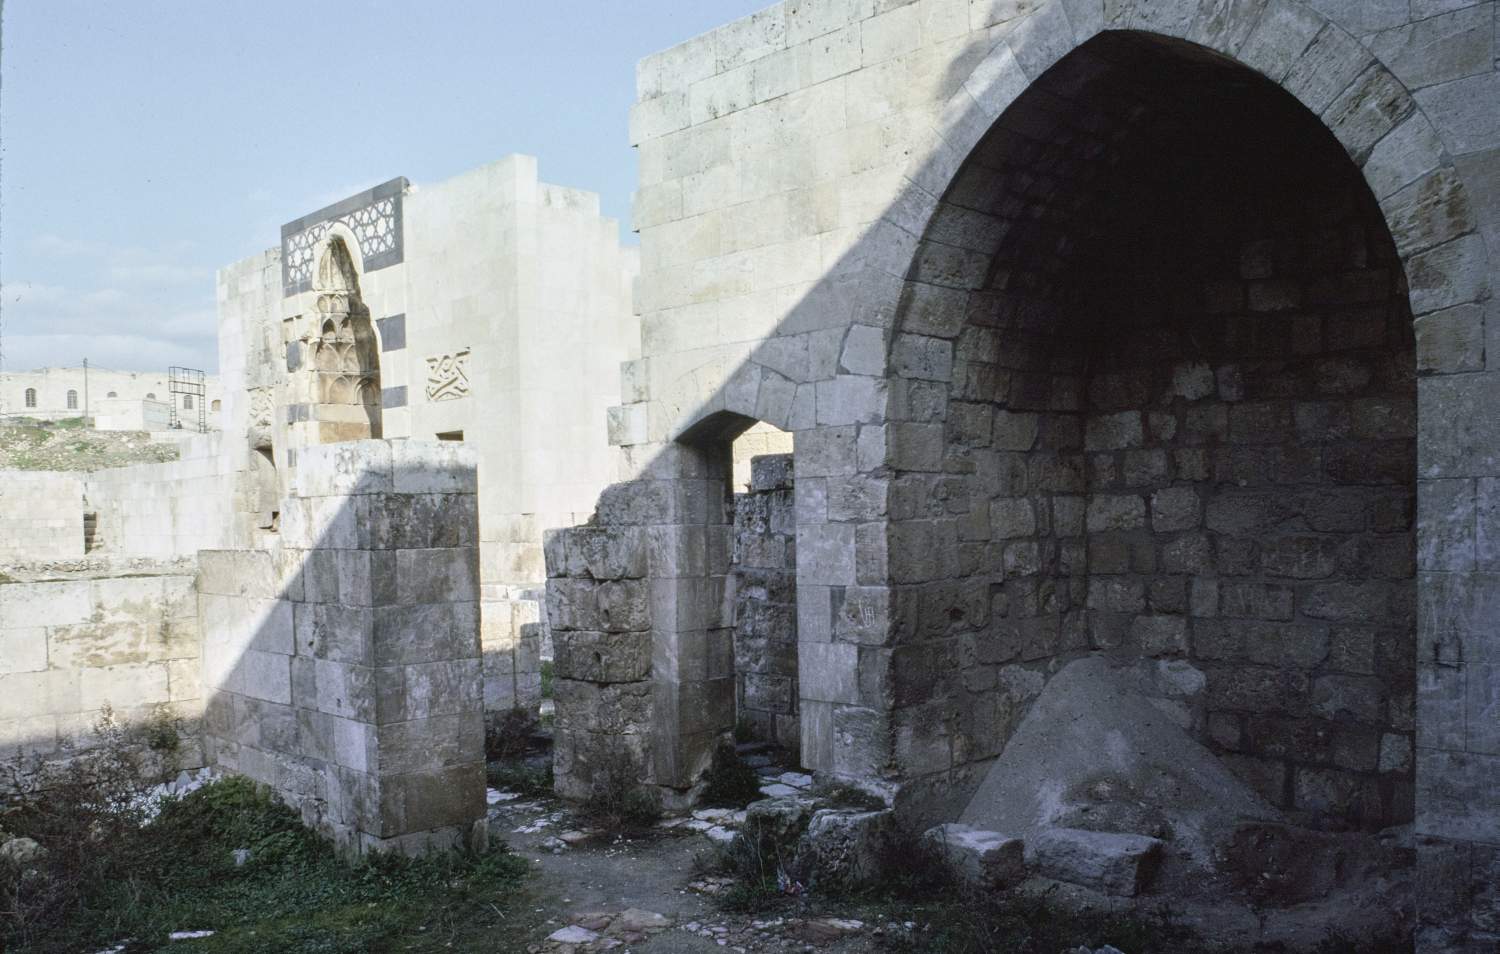 View from within structure south of Palace of al-Malik al-Zahir Ghazi, facing northeast toward entry portal to palace.